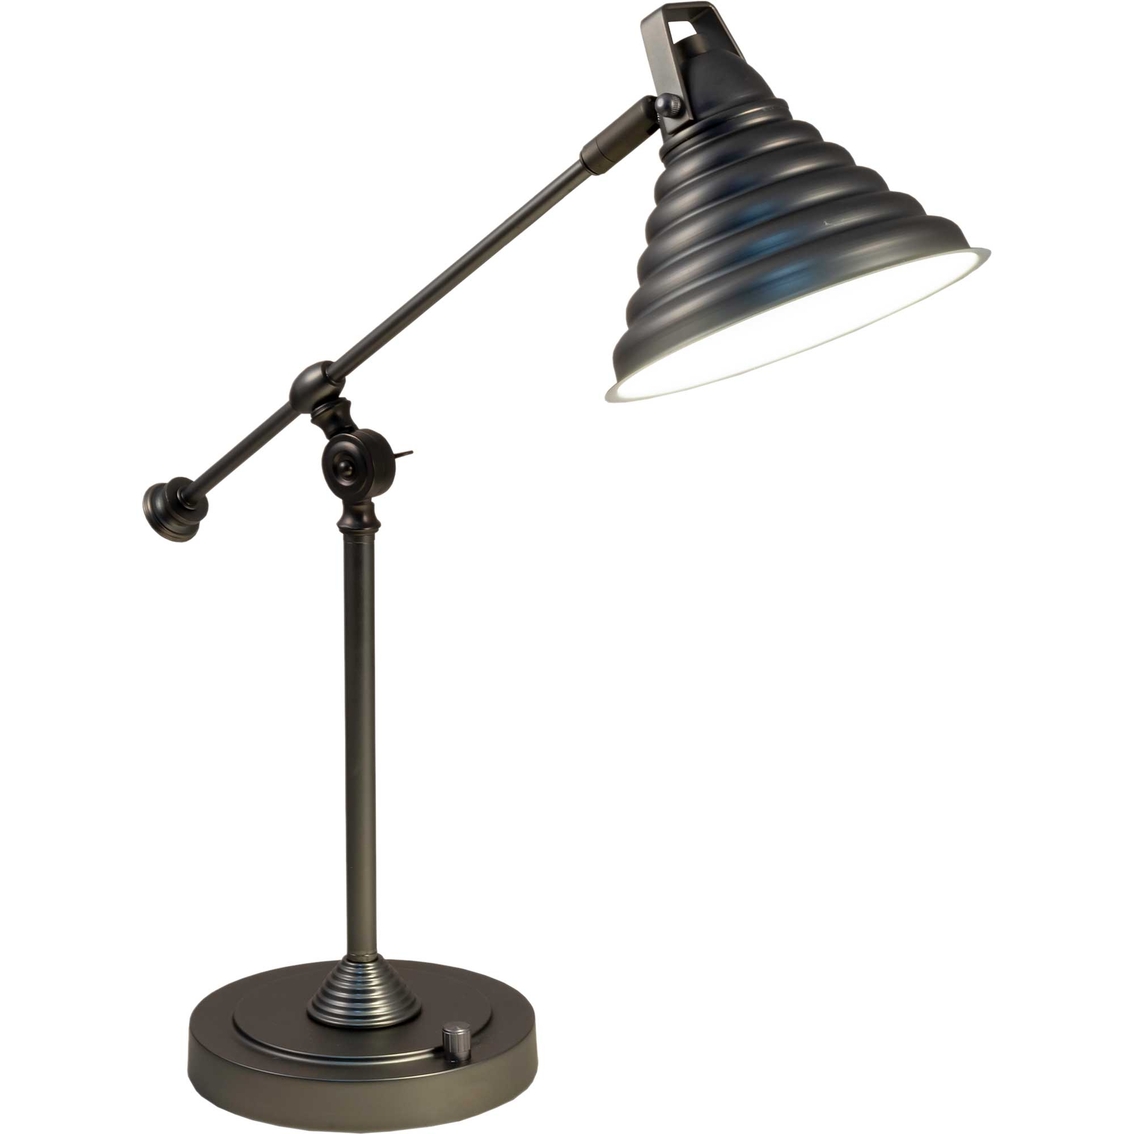 Dale Tiffany Springdale 21.5 in. H Cone LED Desk Lamp with USB Charger